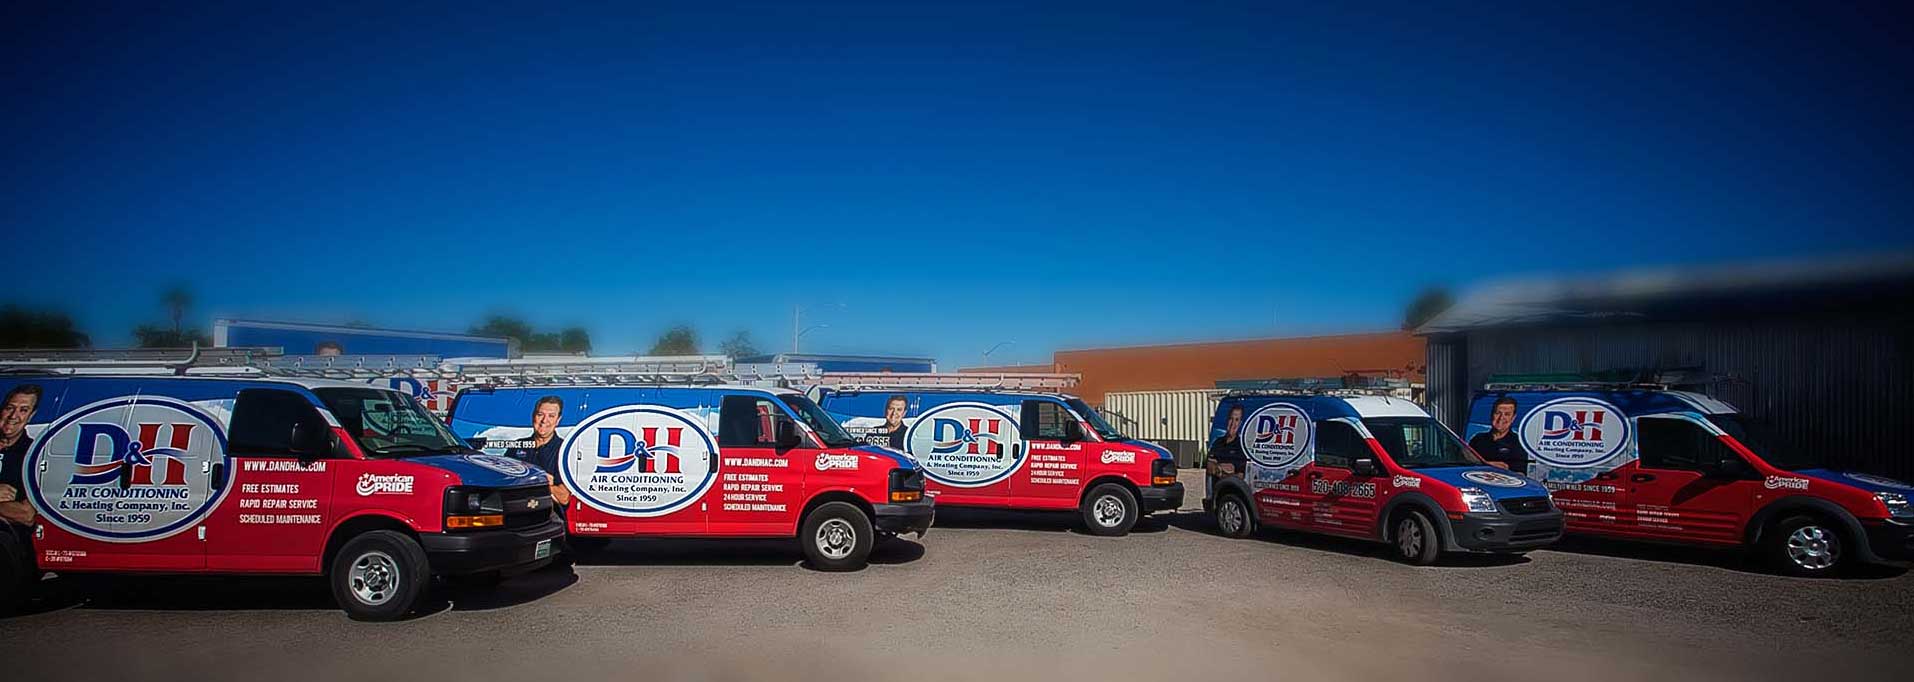 D&H AC Fleet: Loaded with Parts for Air Conditioning Repair